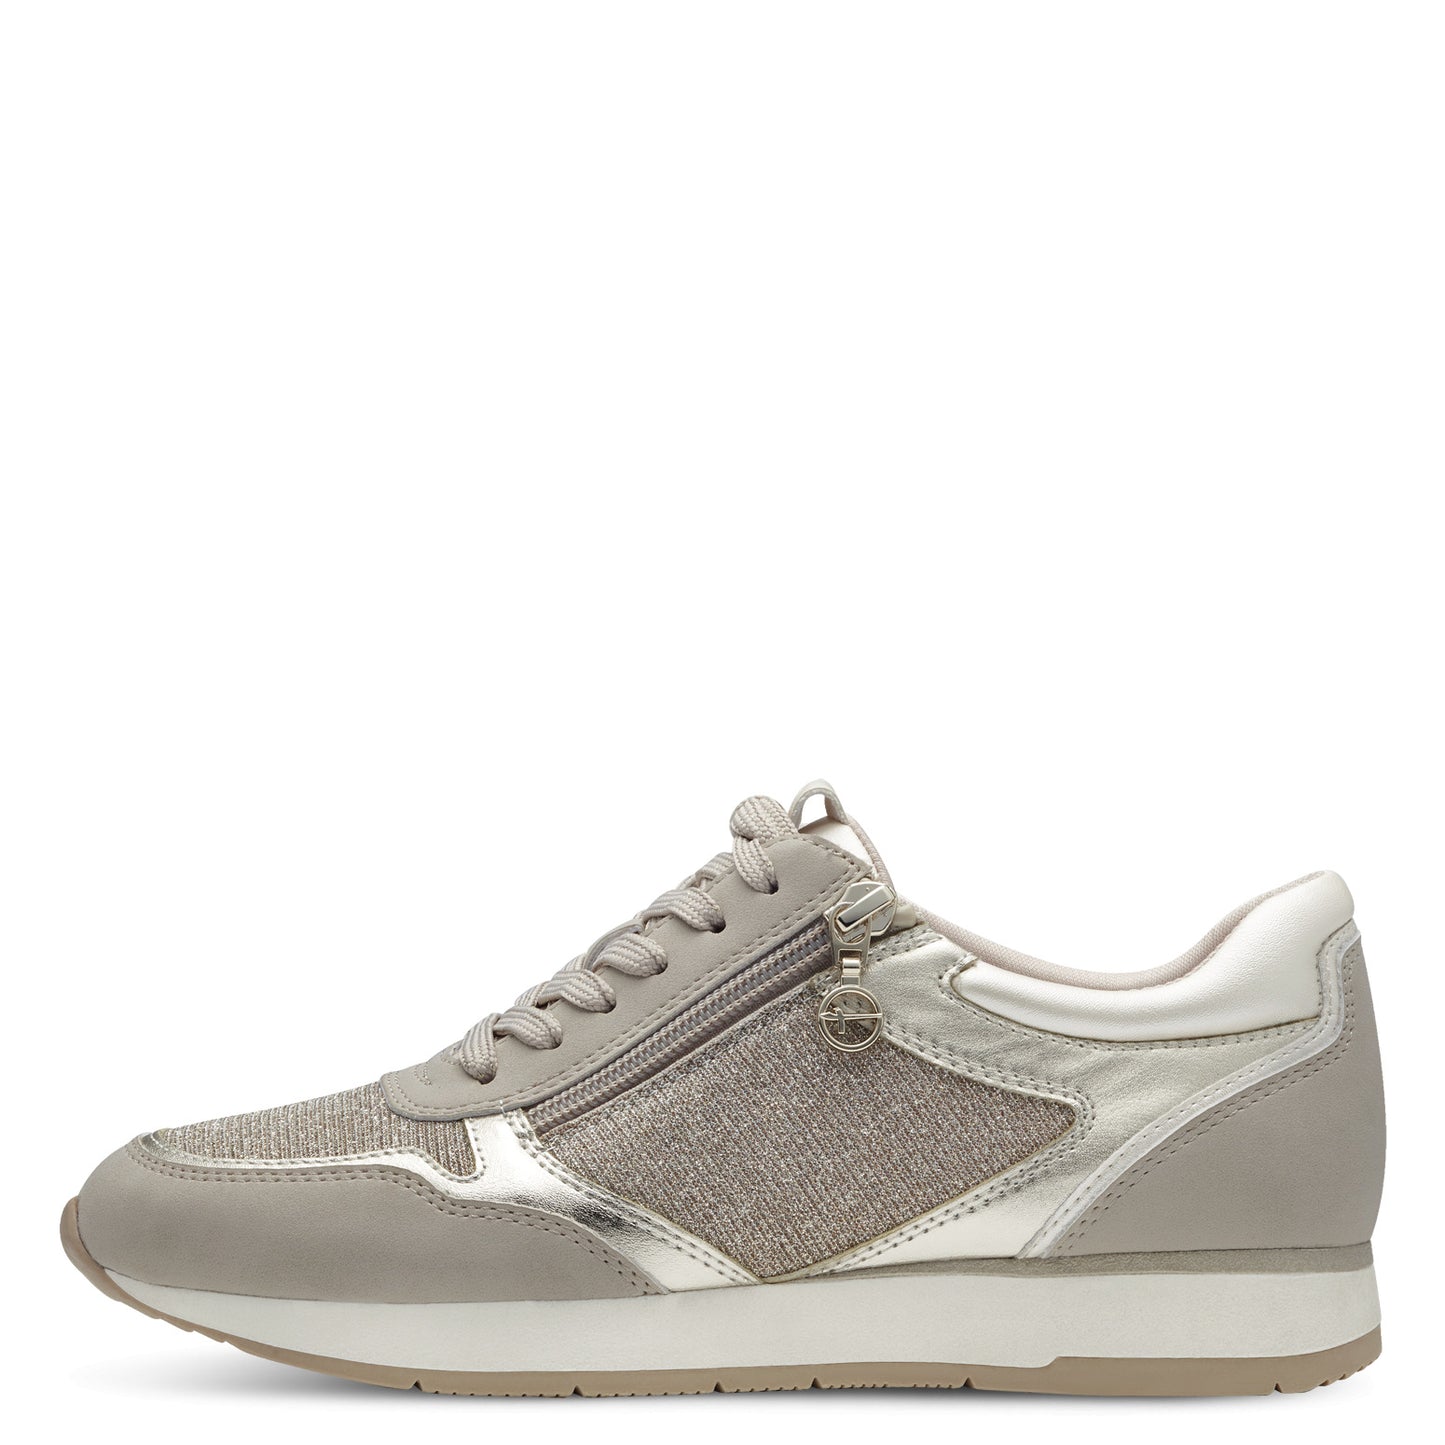 Anchorage taupe sneakers 